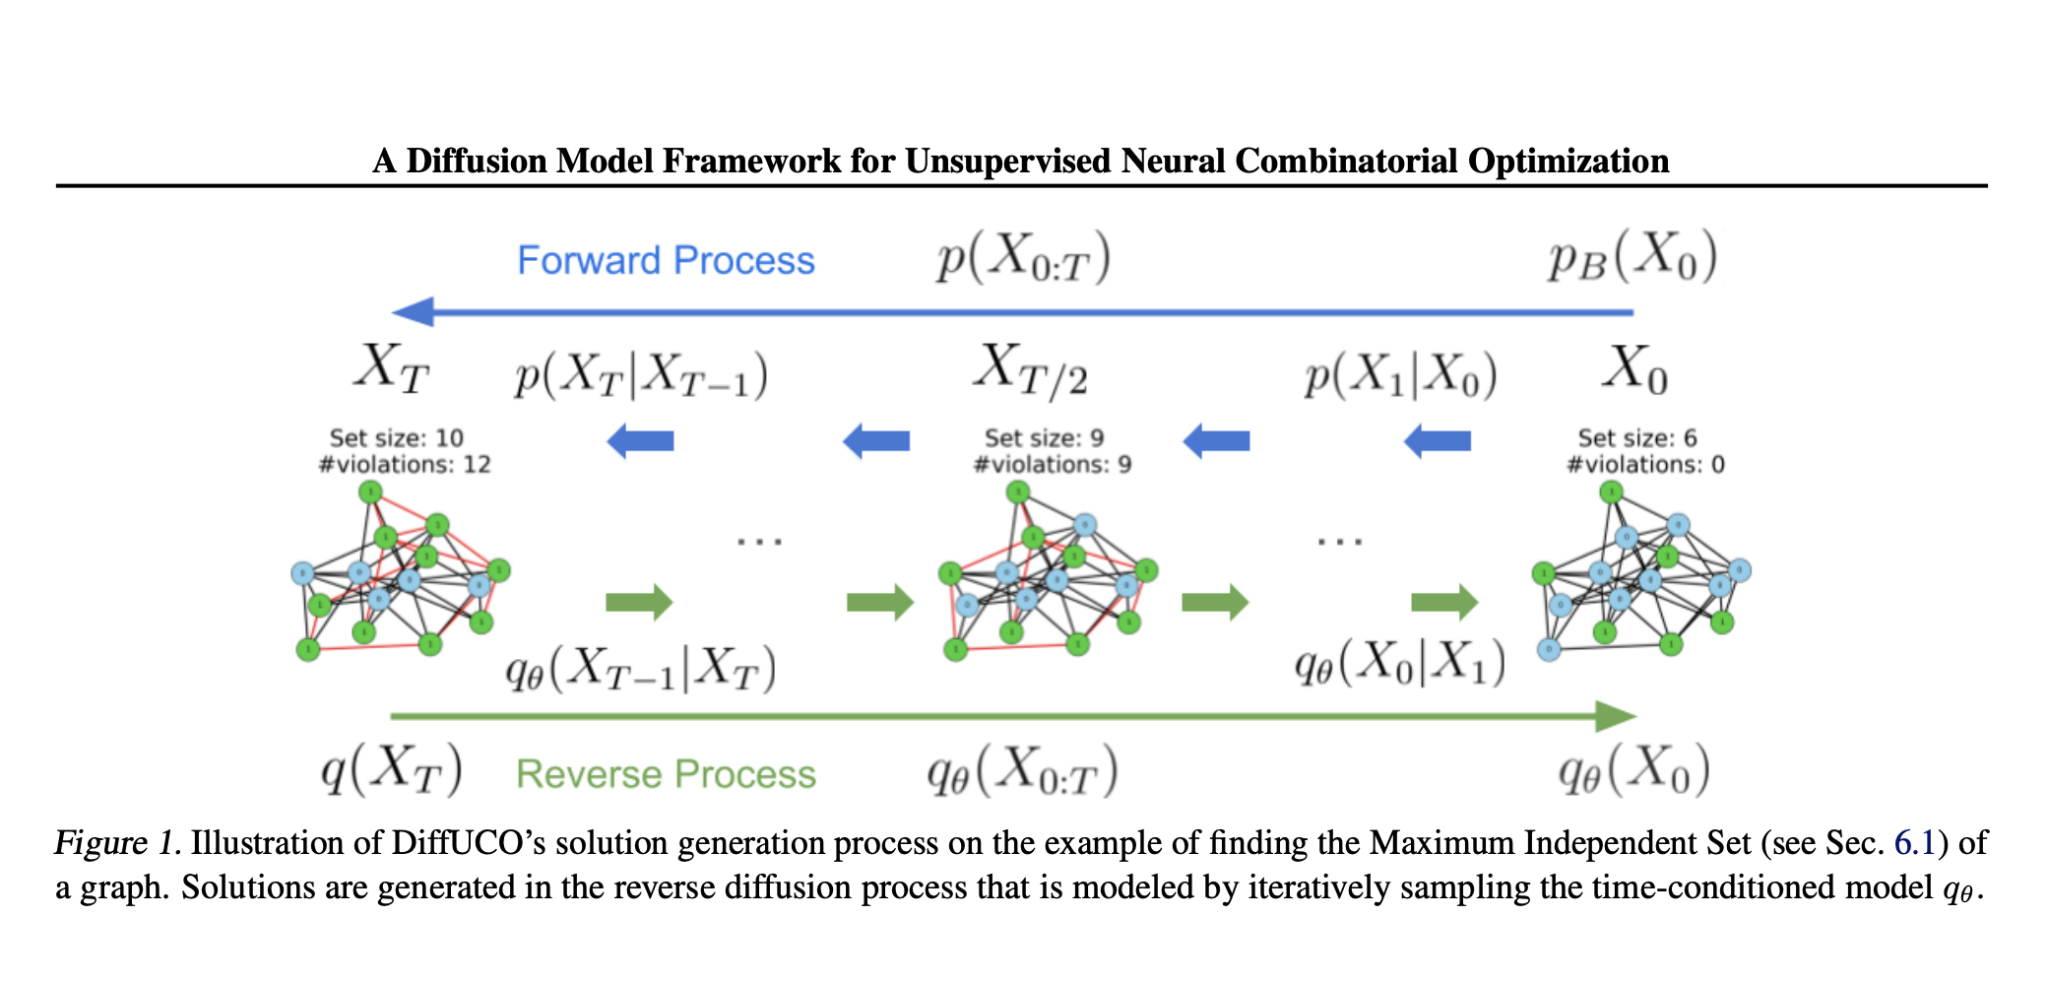  DiffUCO: A Diffusion Model Framework for Unsupervised Neural Combinatorial Optimization